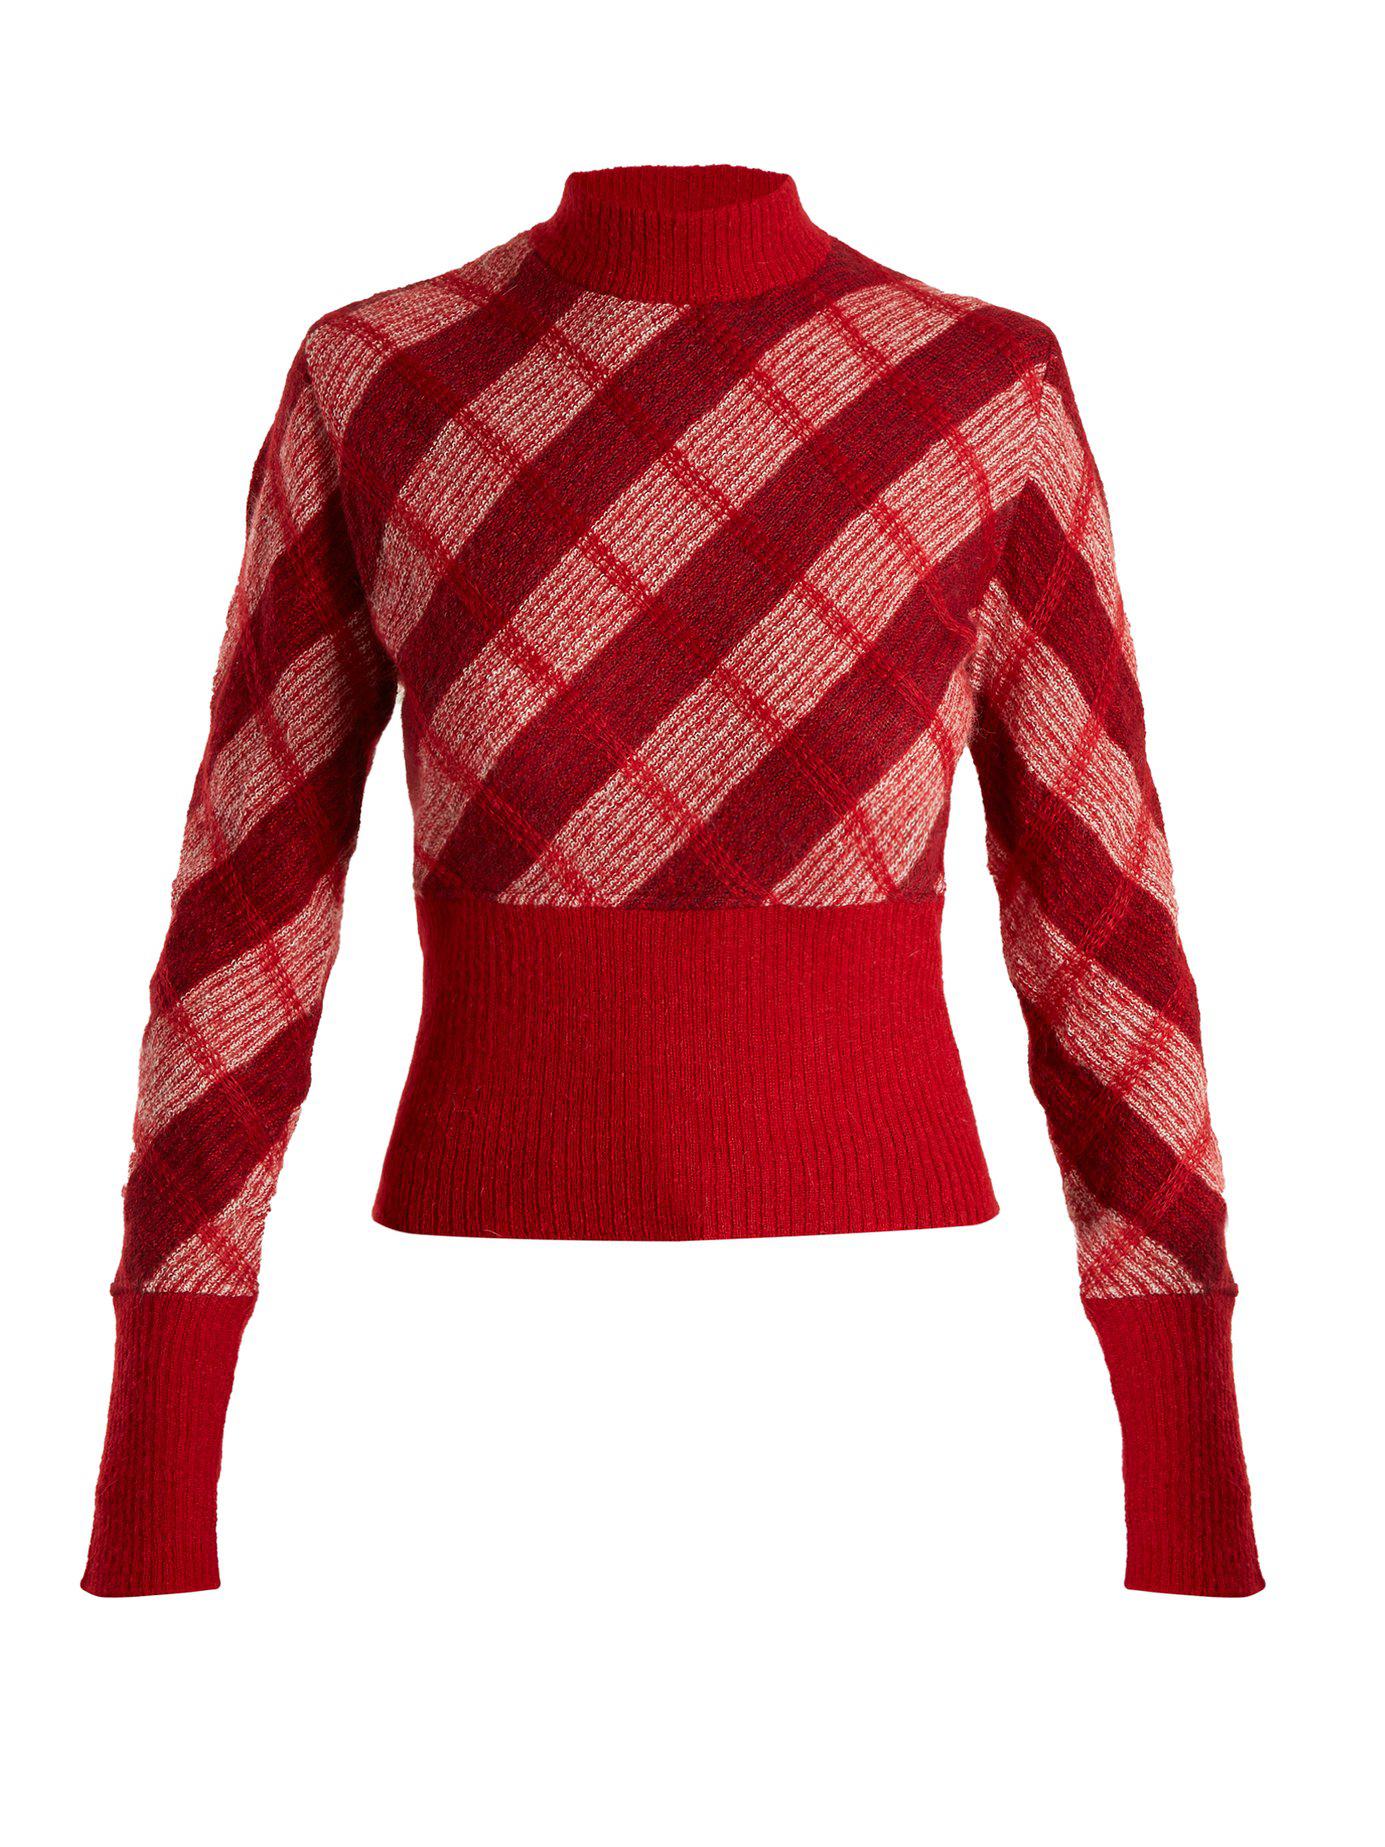 Miu Miu Checked Mohair-blend Sweater in Bordeaux (Red) - Lyst